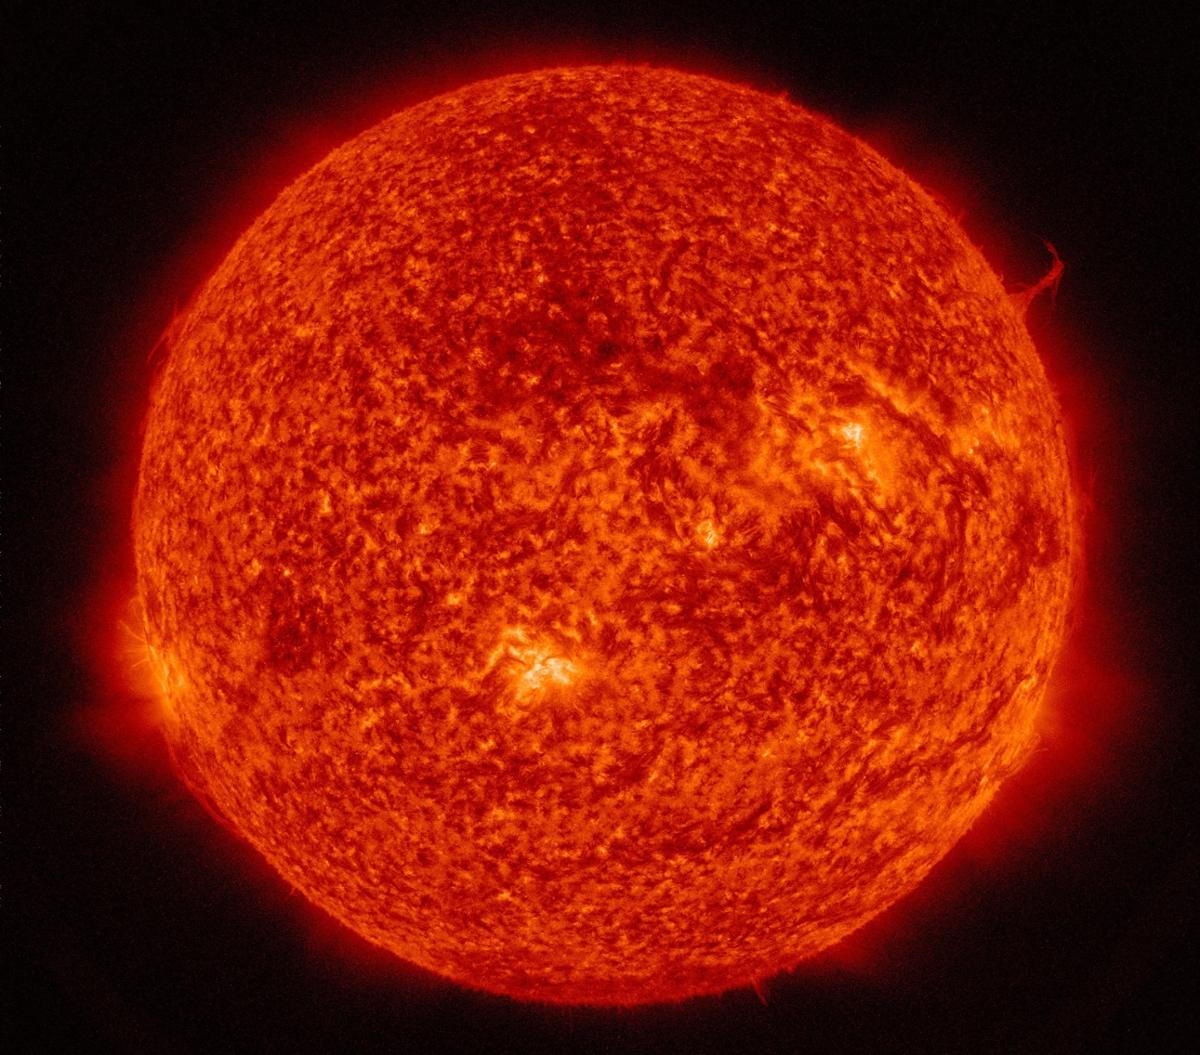 The sun with a dark orange light and a large single solar plume on the right side